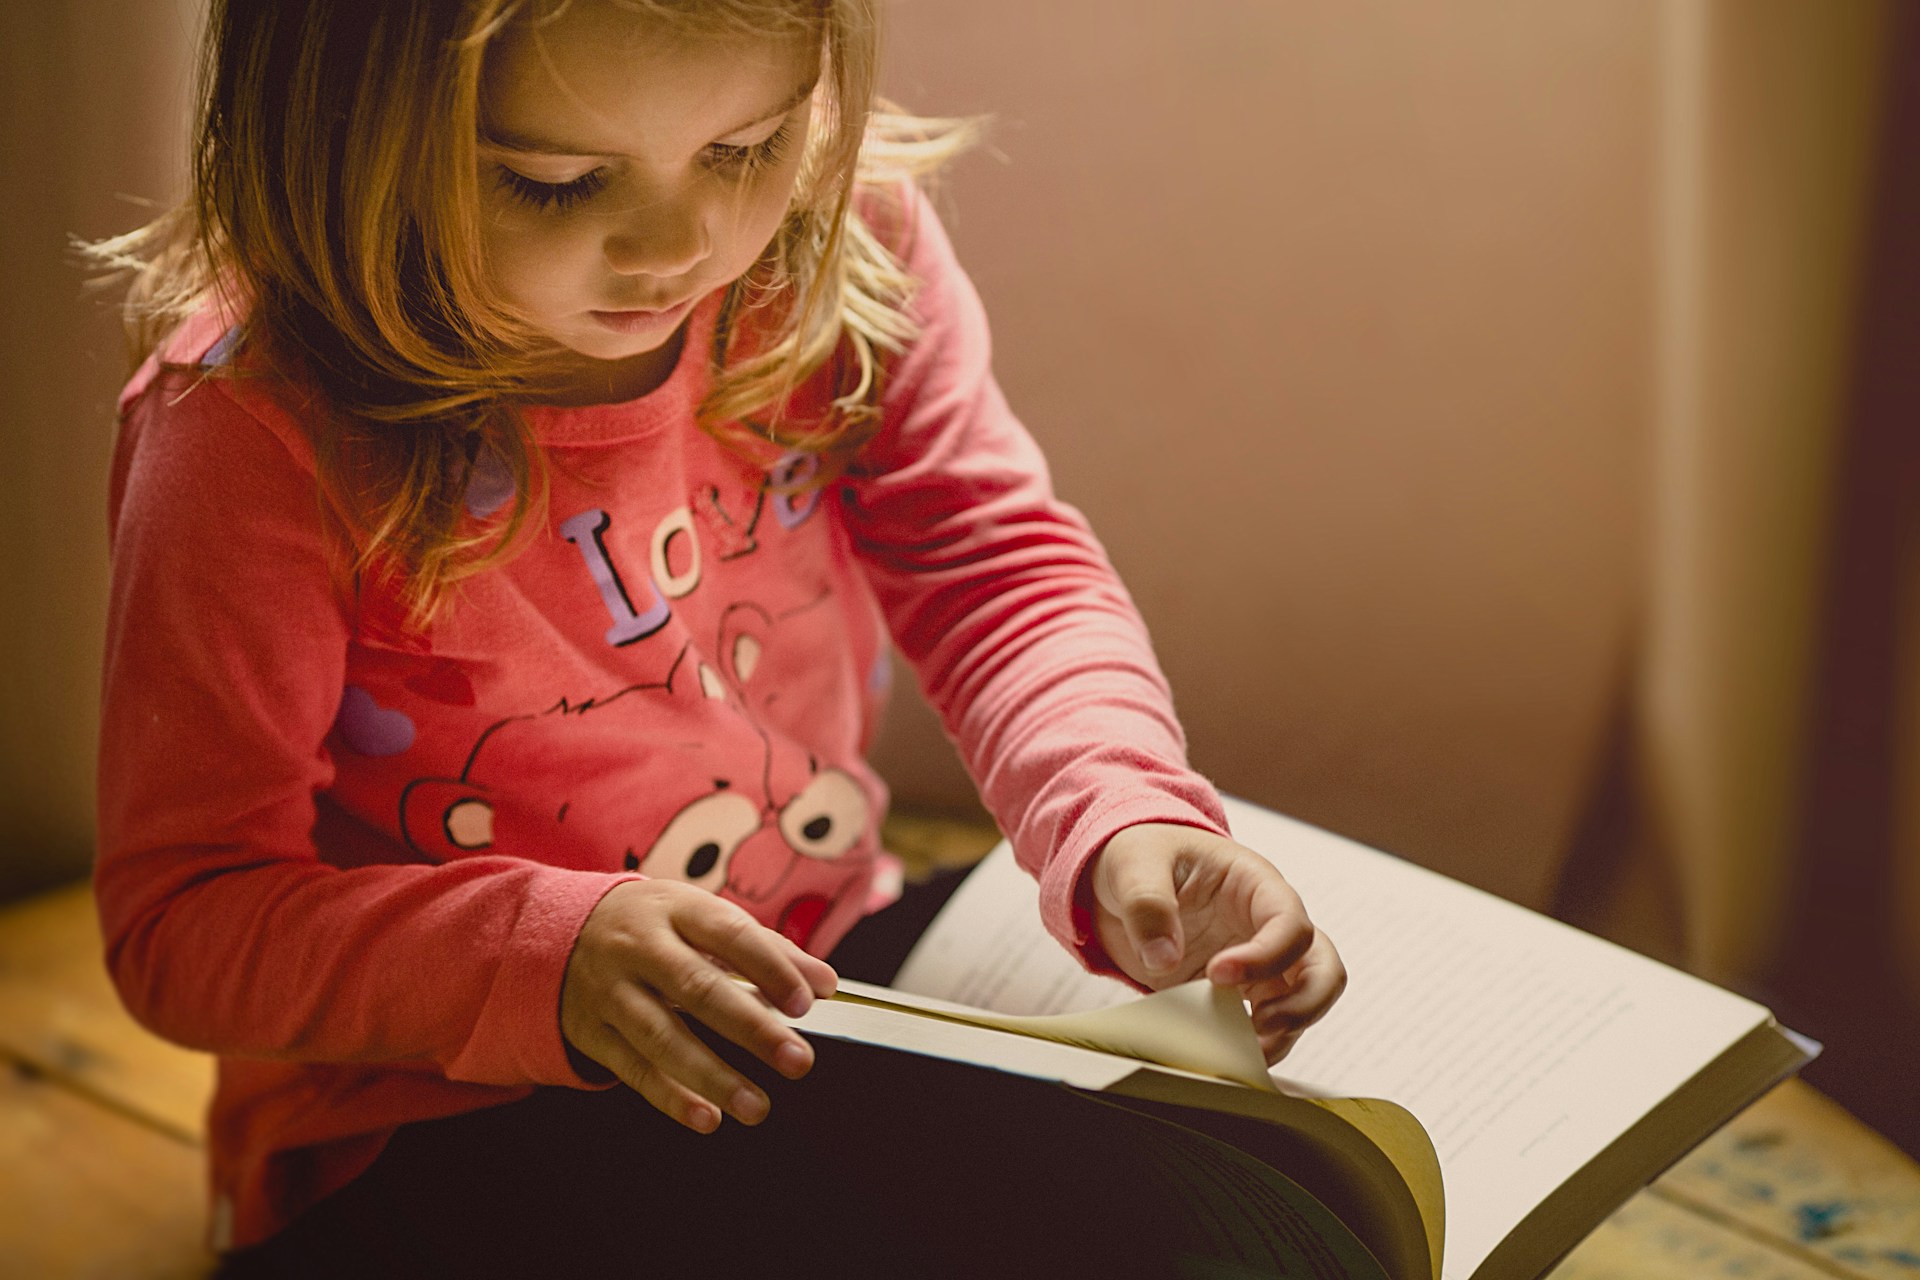 It's been shown that reading is directly connected to improving vocabulary, comprehension, and creativity in kids, so keep their brains active during the summer by picking up some books for them to read. Find out what genre they best enjoy so they see it as a fun activity they might grow to love rather than a chore.